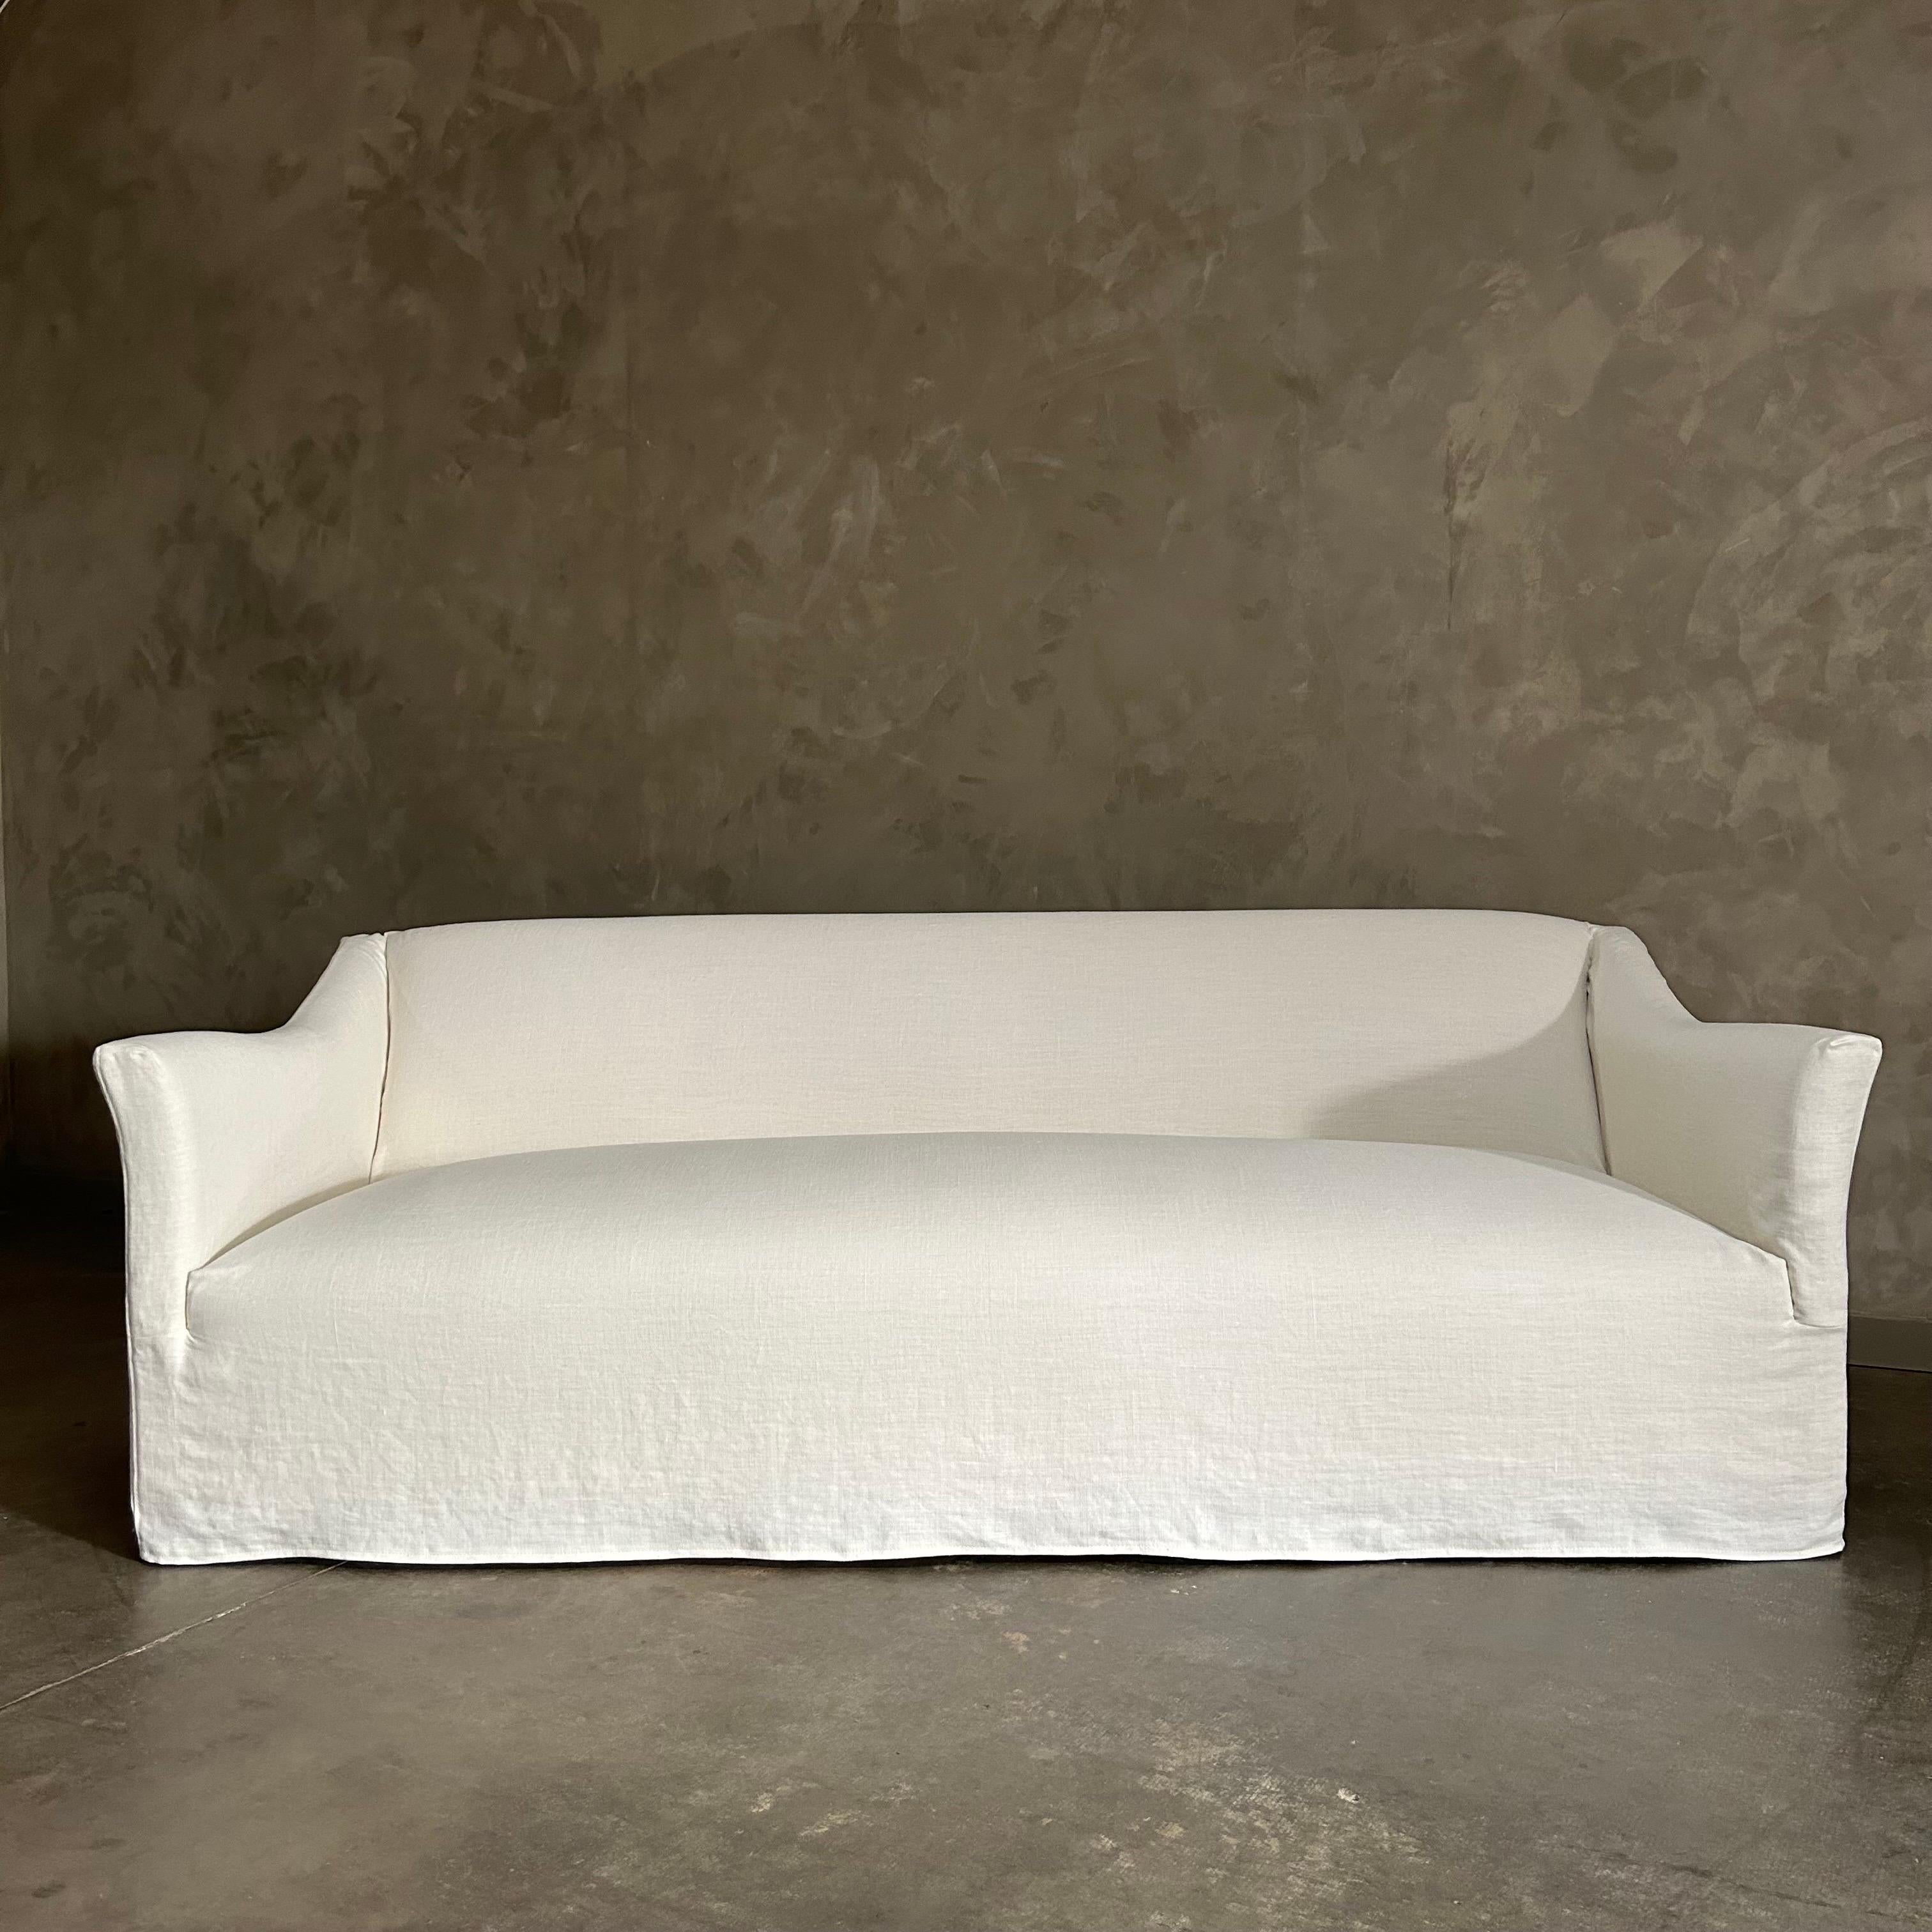 BH Bespoke Collection
Olivier Sofa Slip Covered
Shown in Heavy Oyster White Belgian Linen
DESCRIPTION:
A timeless silhouette with tailored lines and softly flared arms, the Olivier Sofa is a relaxed yet refined classic that will be a lovely addition